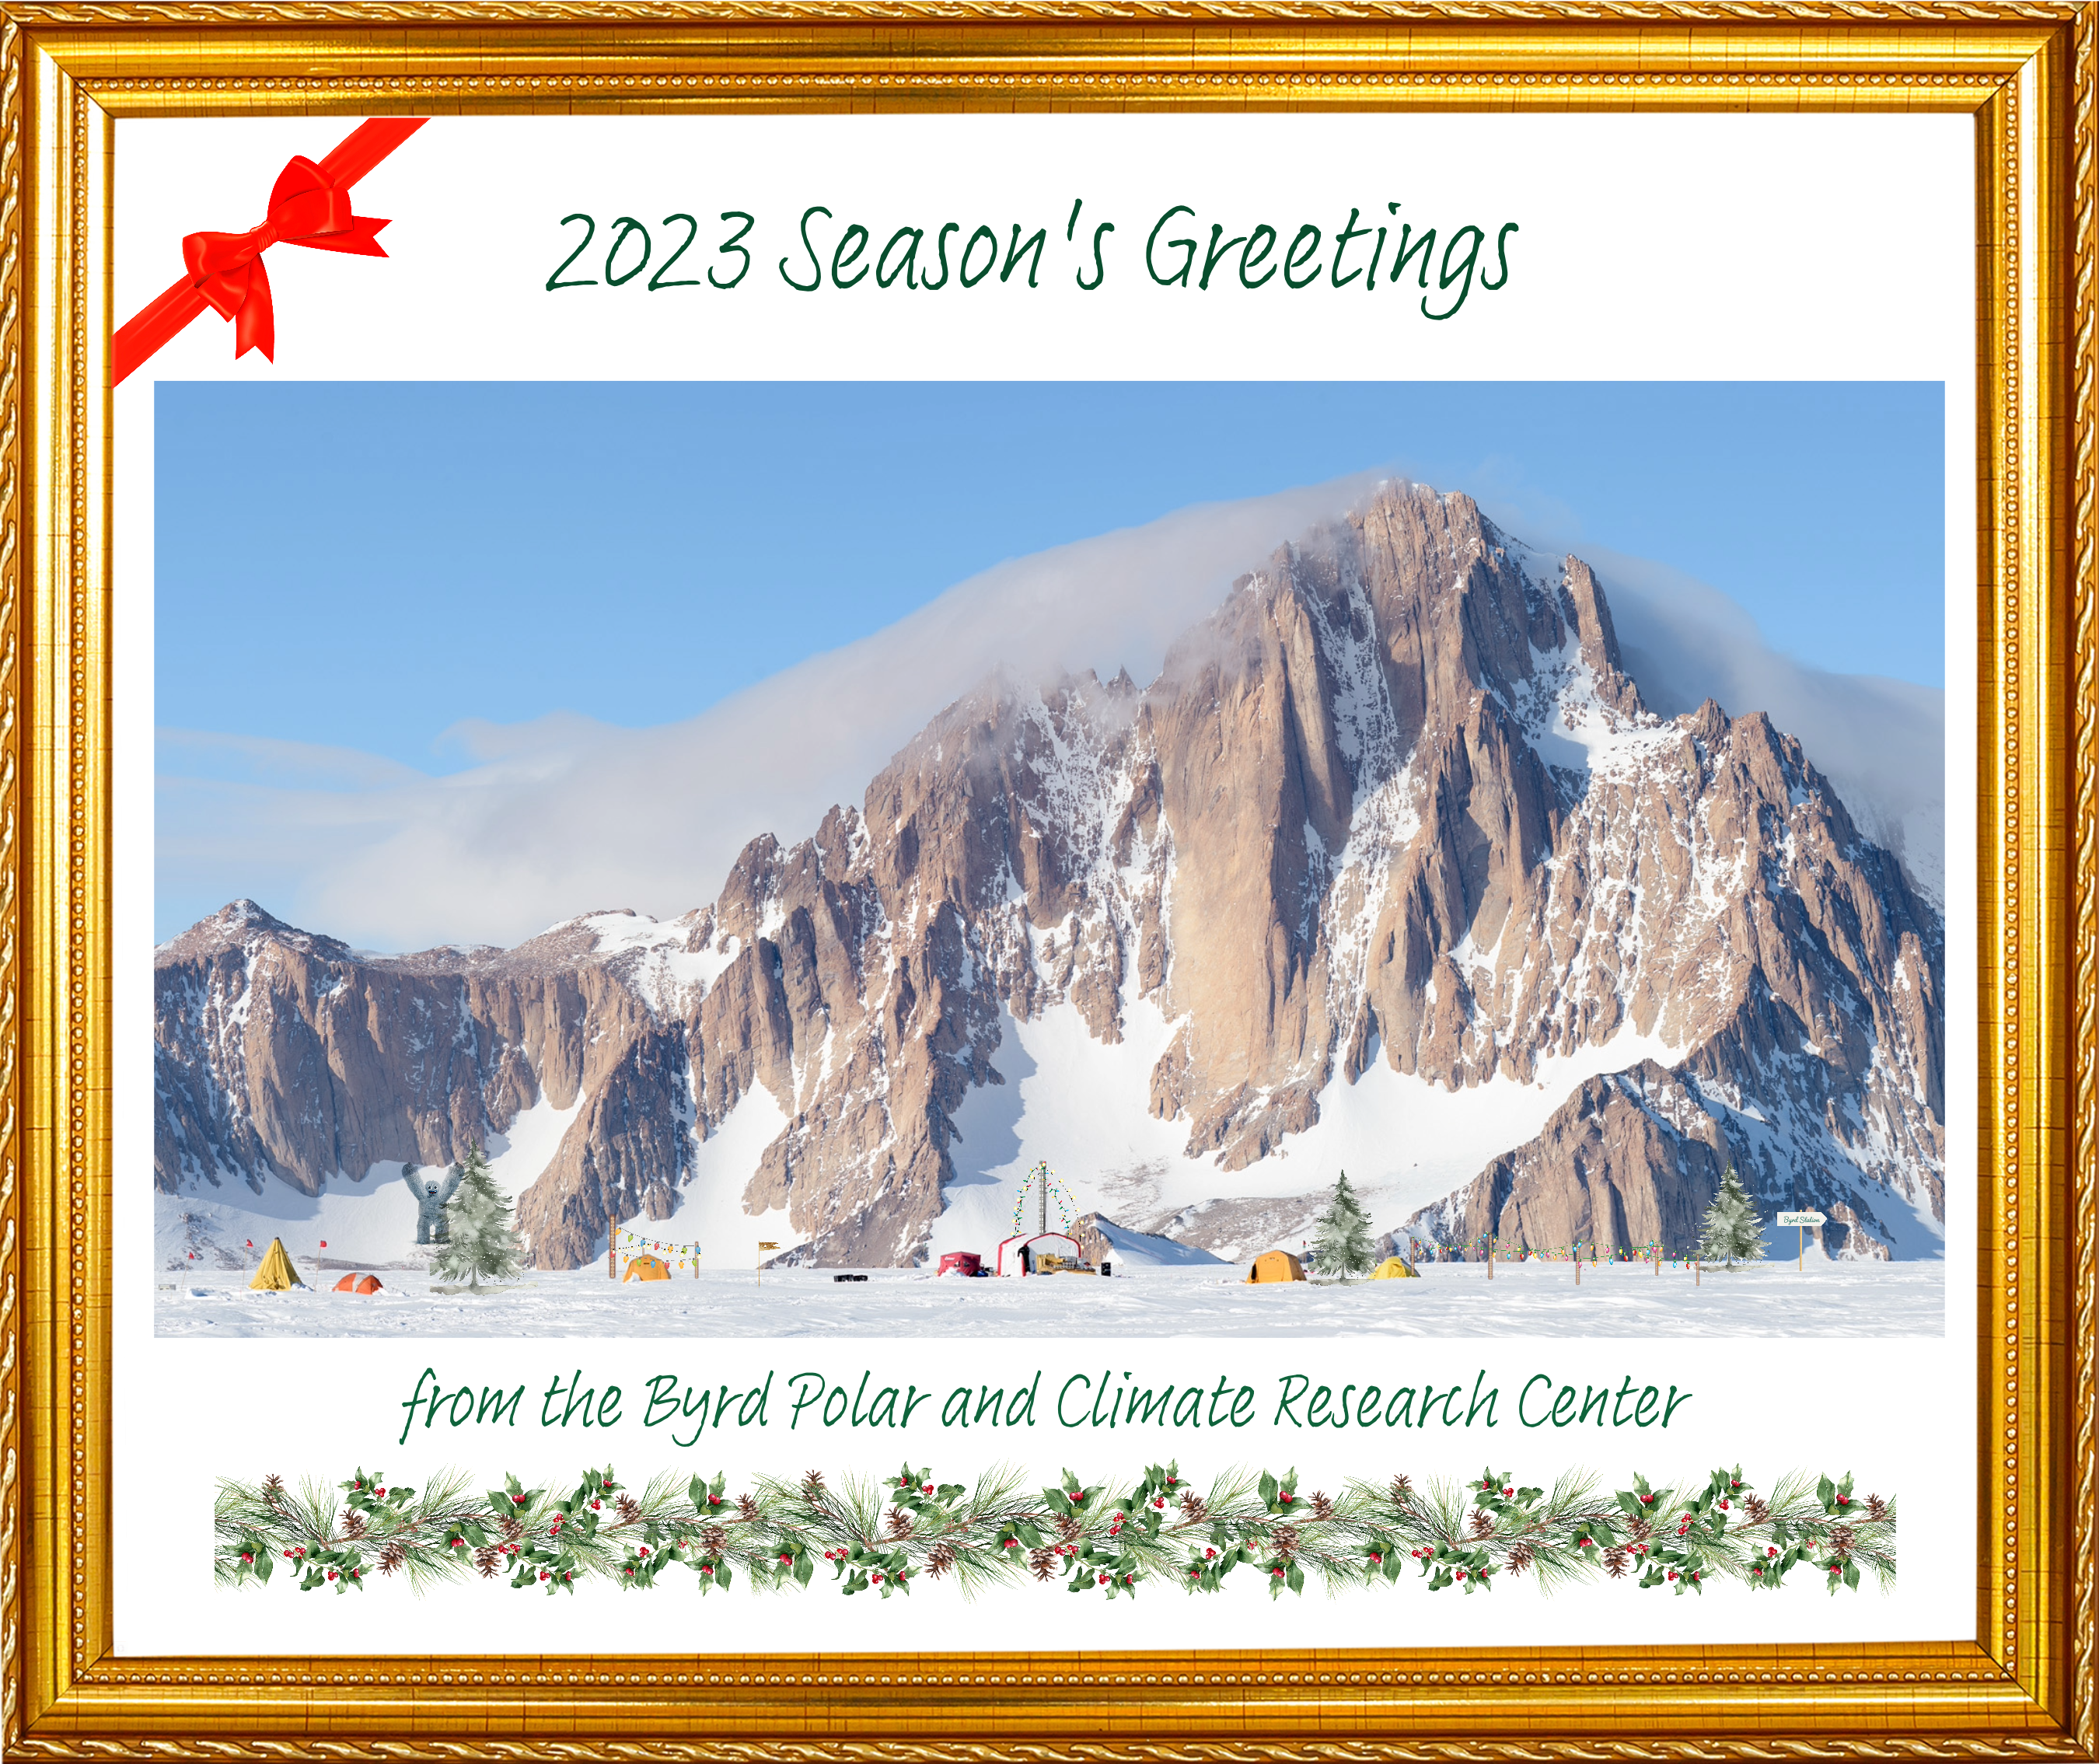 The Byrd Center Holiday card: an image of a mountain covered with snow with trees and tents at the base under blue sky and white clouds with a bow at the top left edge of the framed image with text saying 2023 Season's Greetings and at the bottom says from The Byrd Polar and Climate Research Center with garland under it.